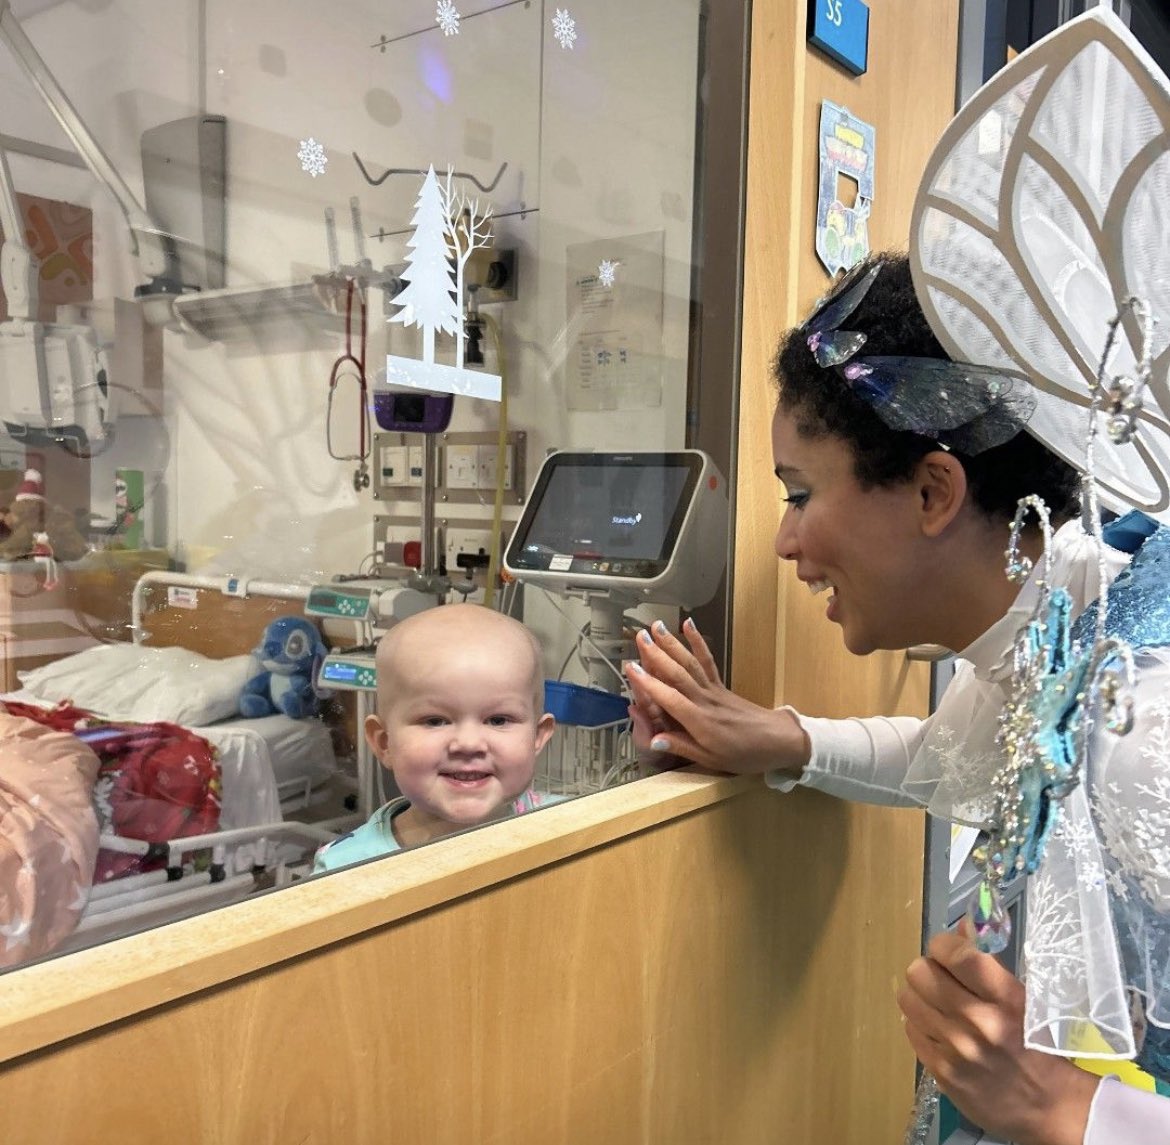 As 2023 draws to a close, we want to share our gratitude to every person or business that supported us this year, to the NHS staff who deliver the best of care and our admiration for the strength of the babies, children and families we support.